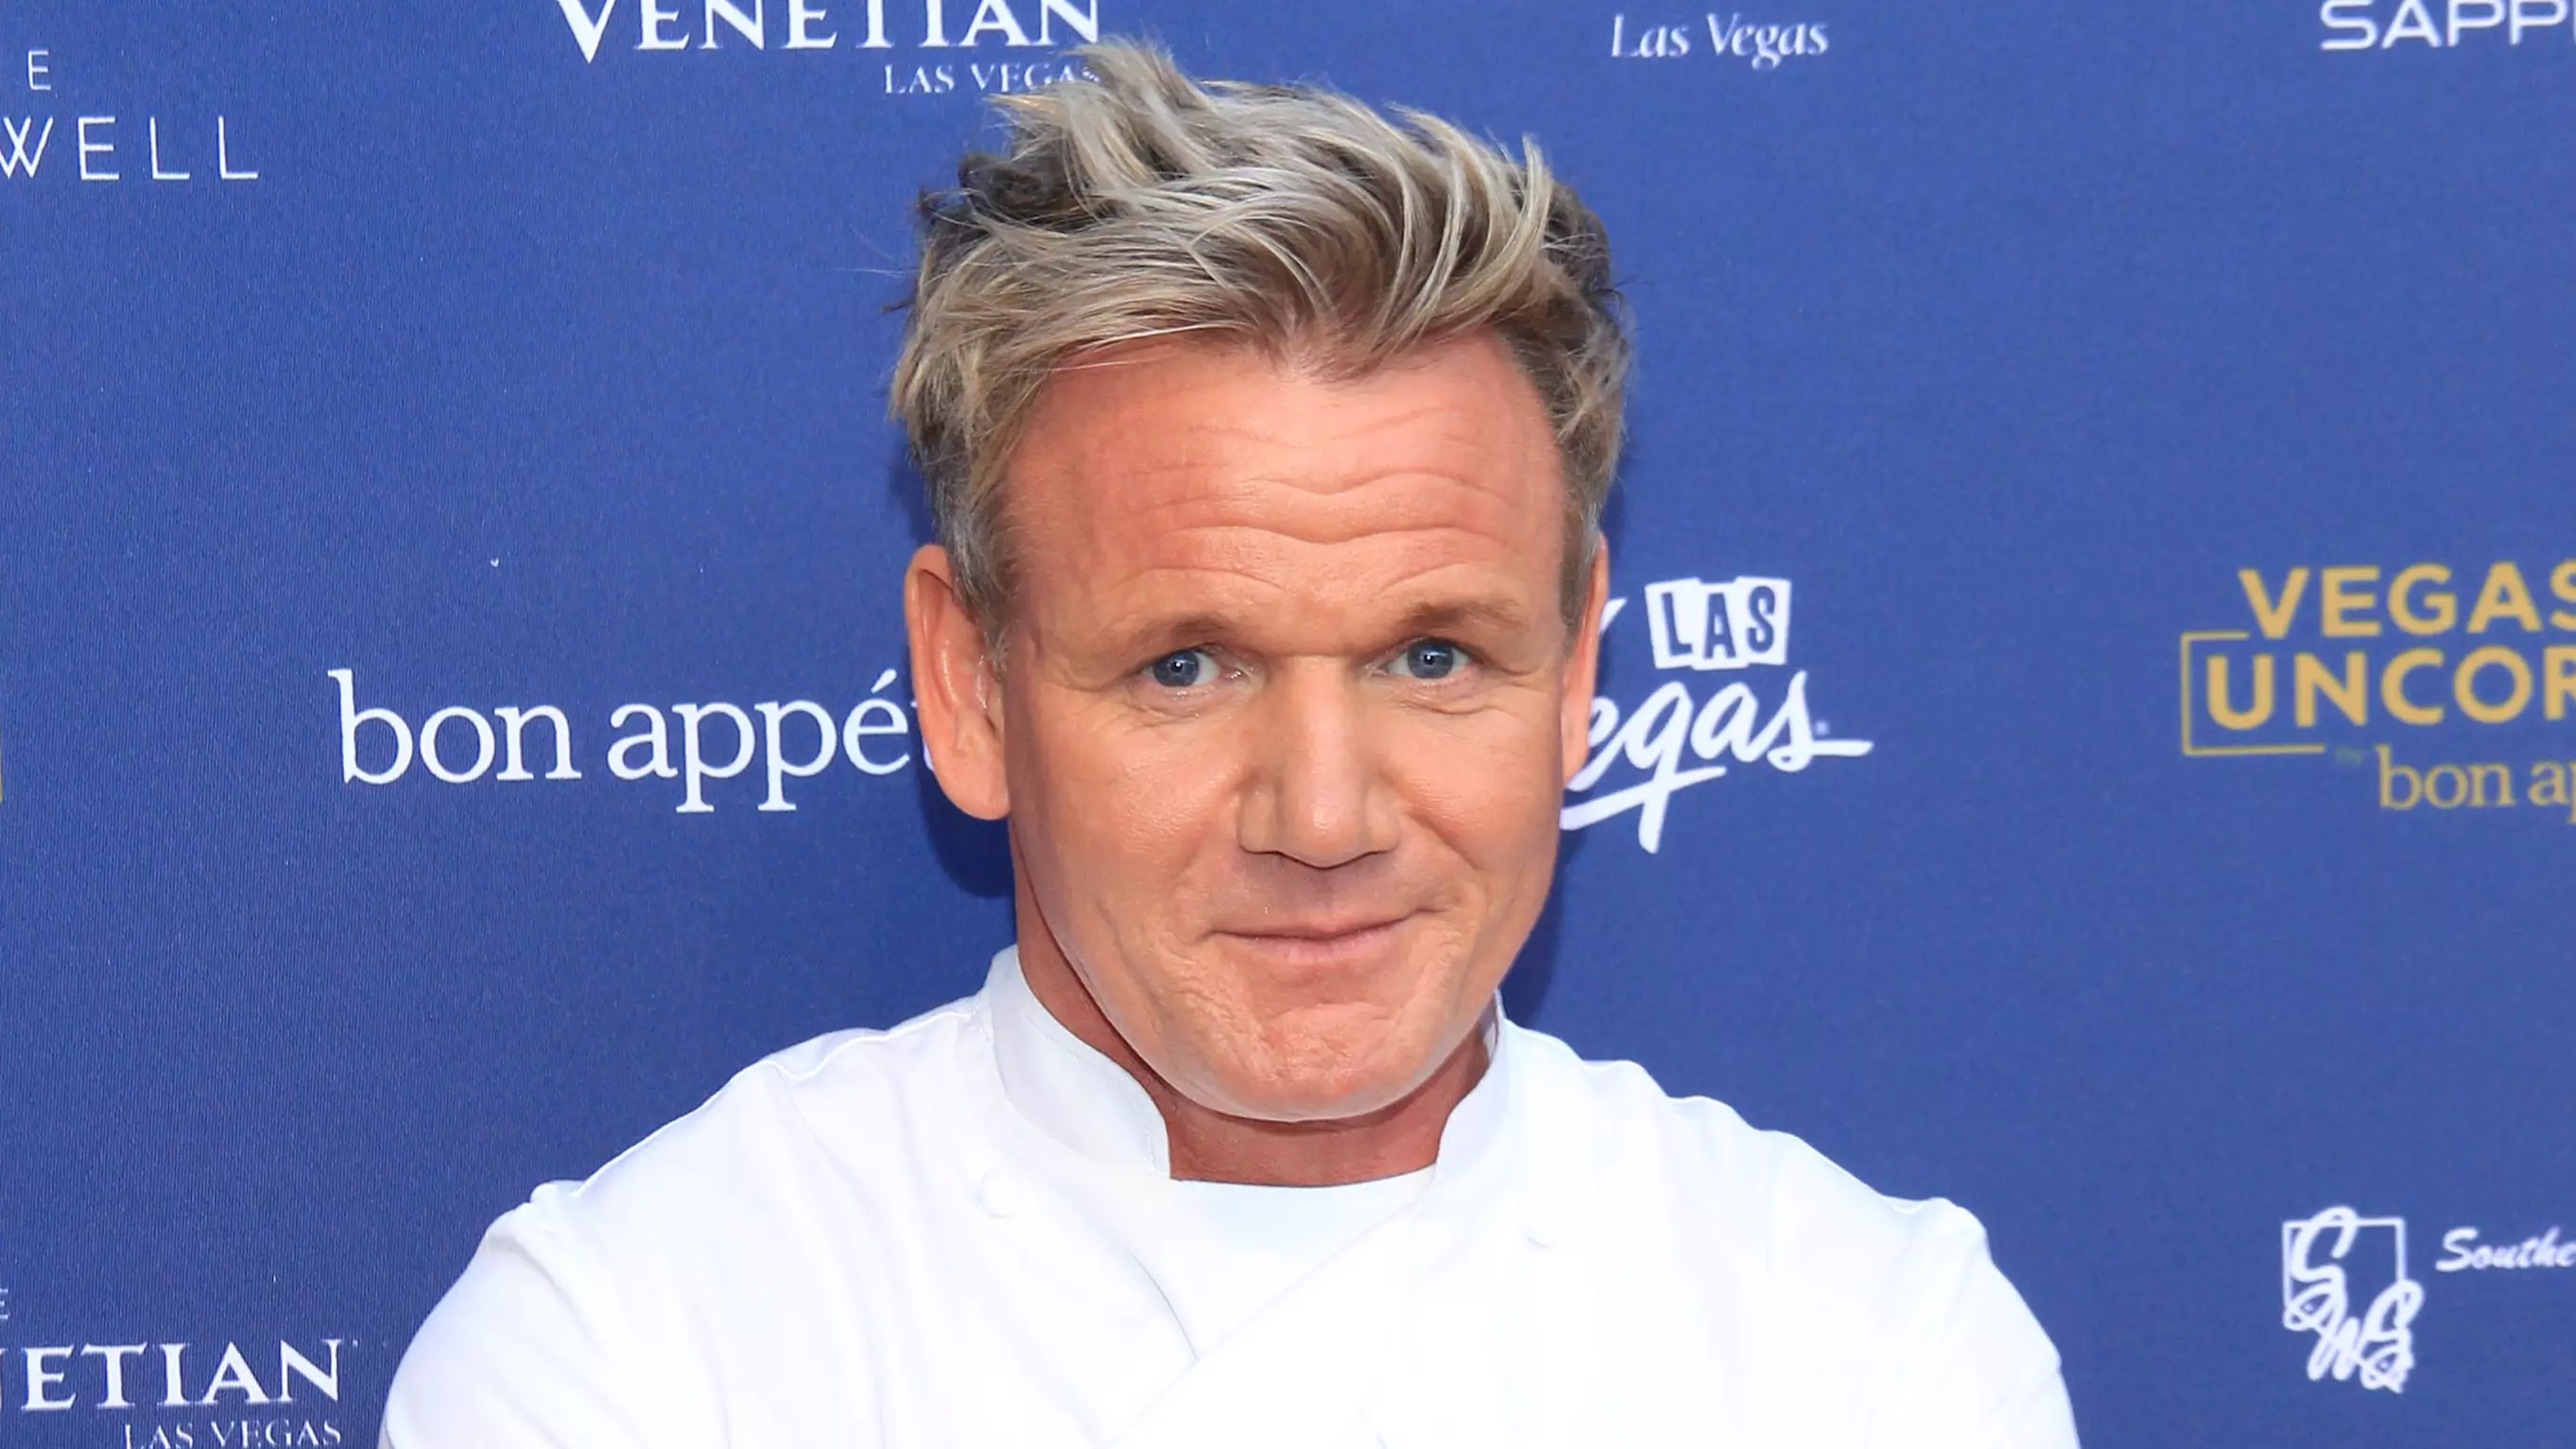 Gordon Ramsay's Life Story Is More Interesting Than Any Of His Shows